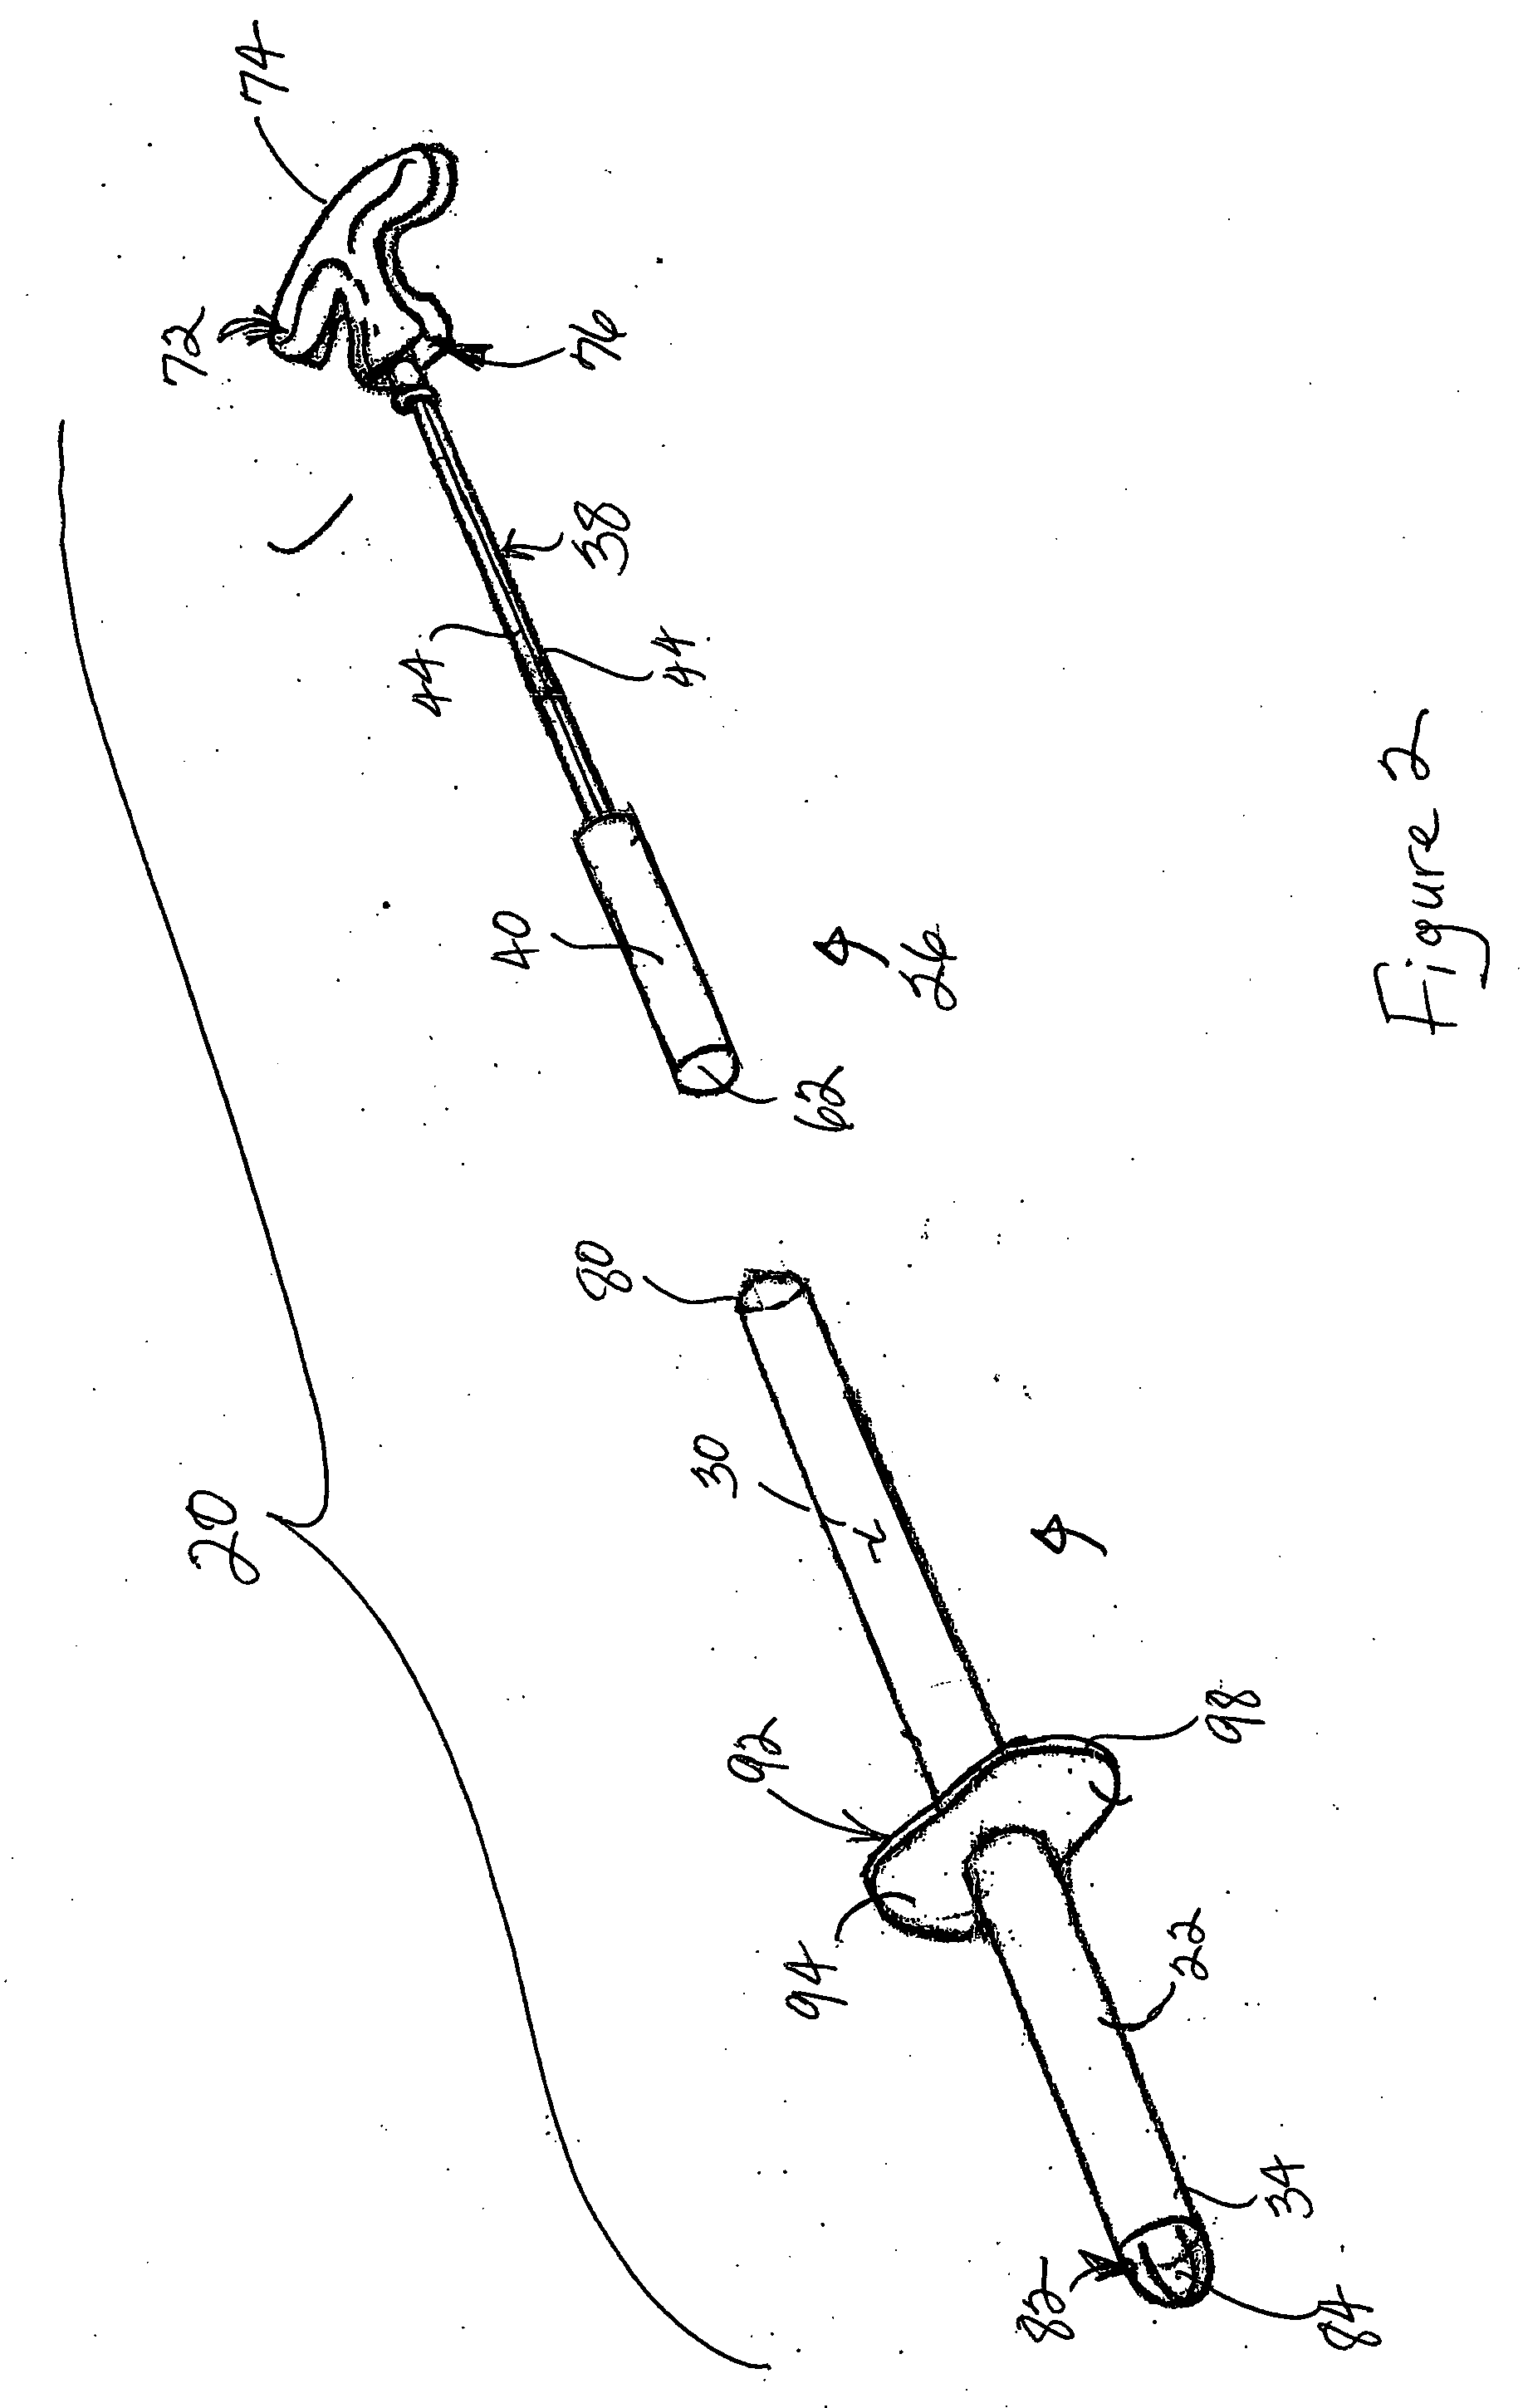 Method and apparatus for delivering a prosthetic fabric into a patient